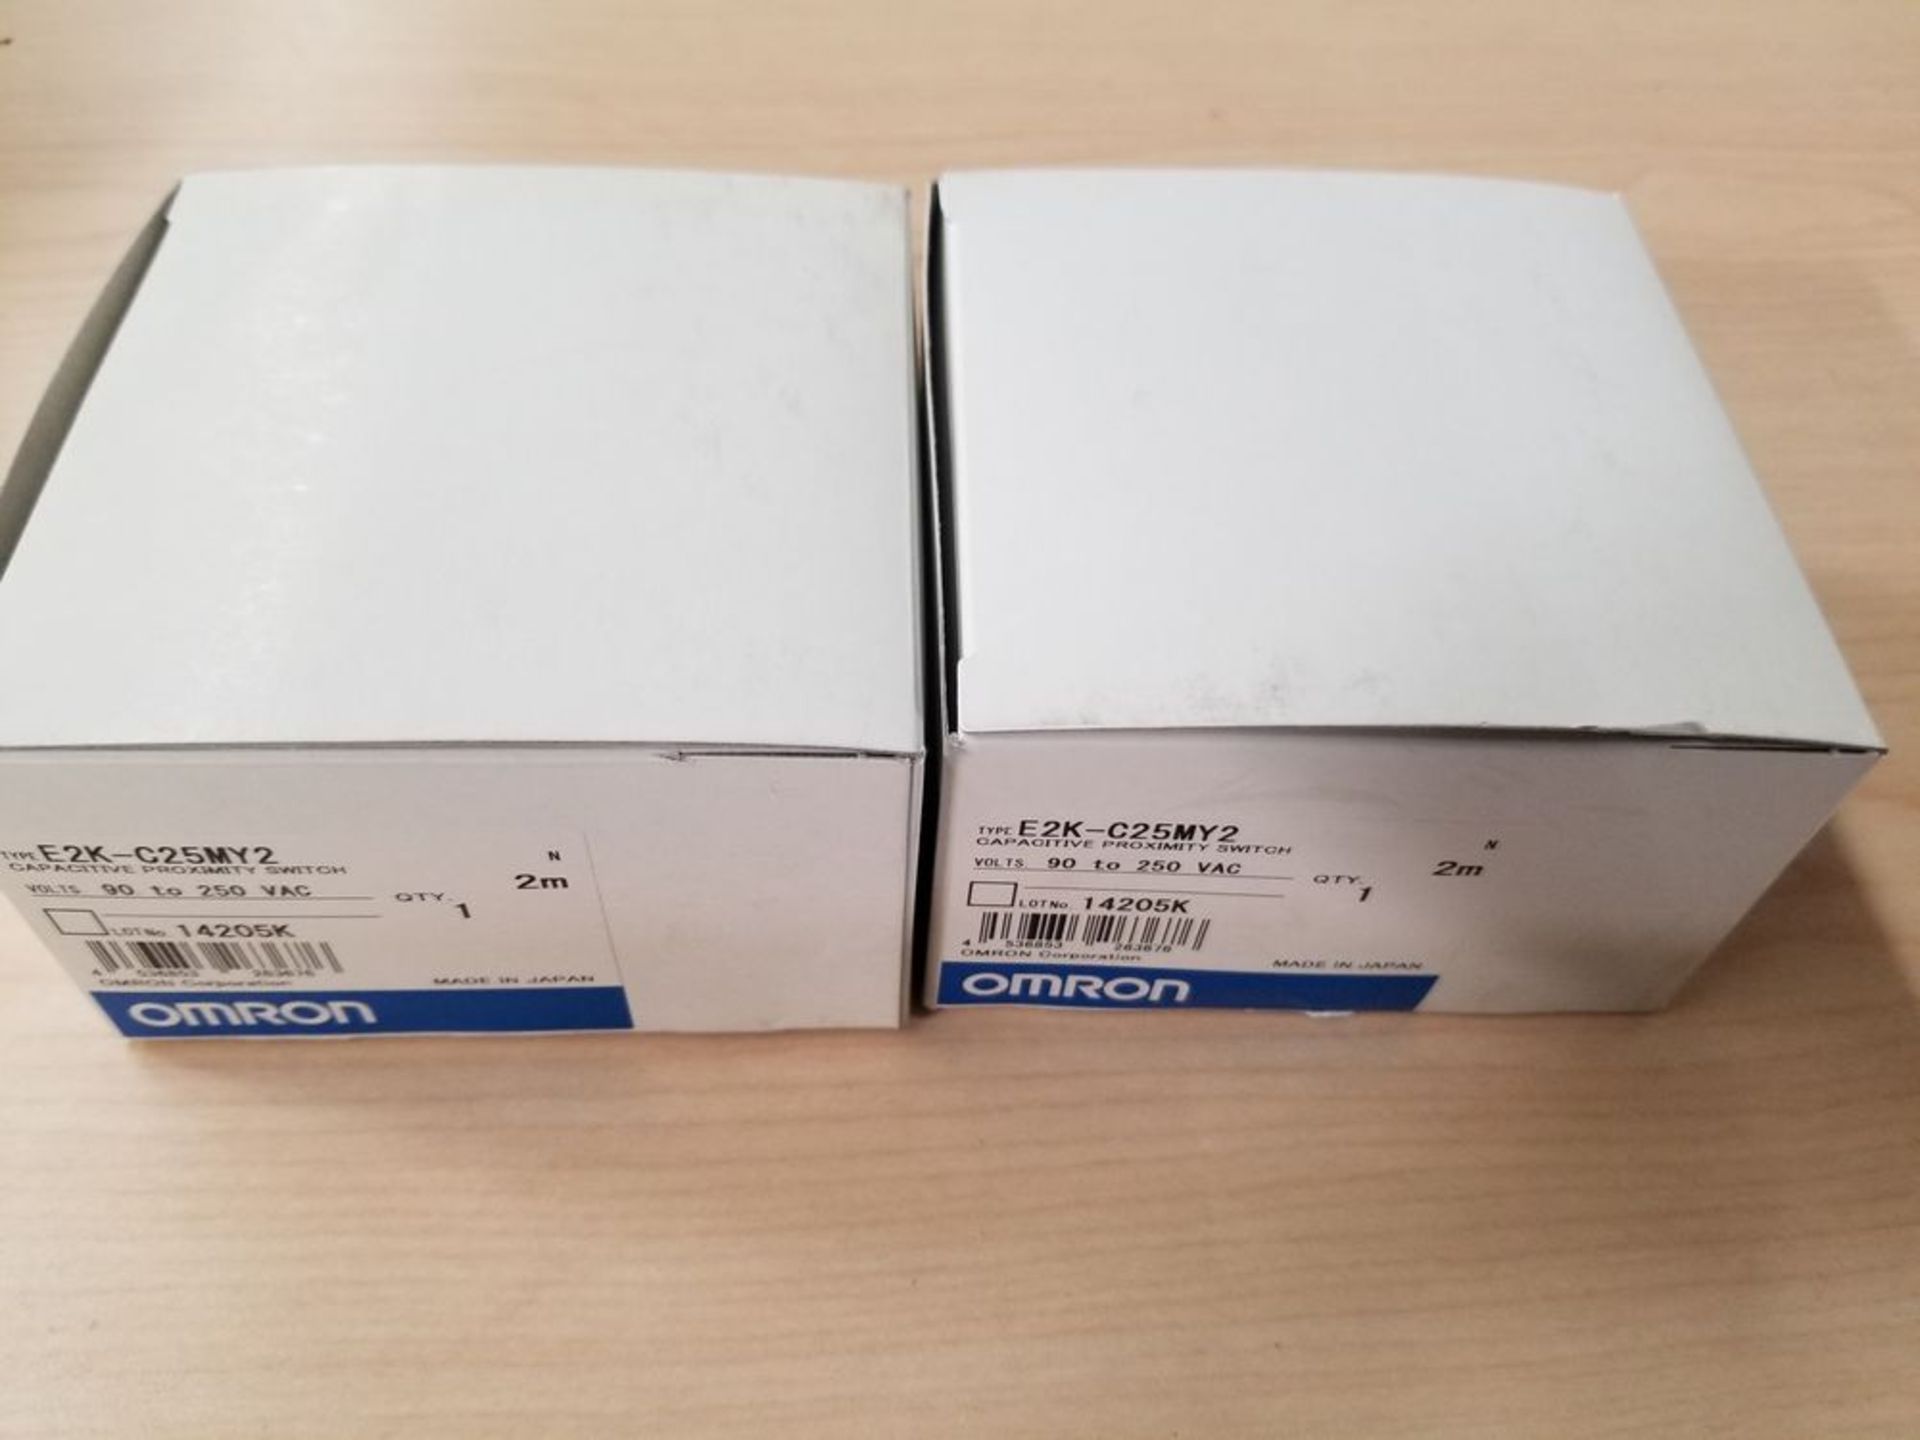 LOT OF 2 NEW OMRON E2K-C25MY2 CAPACITIVE PROXIMITY SWITCHES/SENSORS